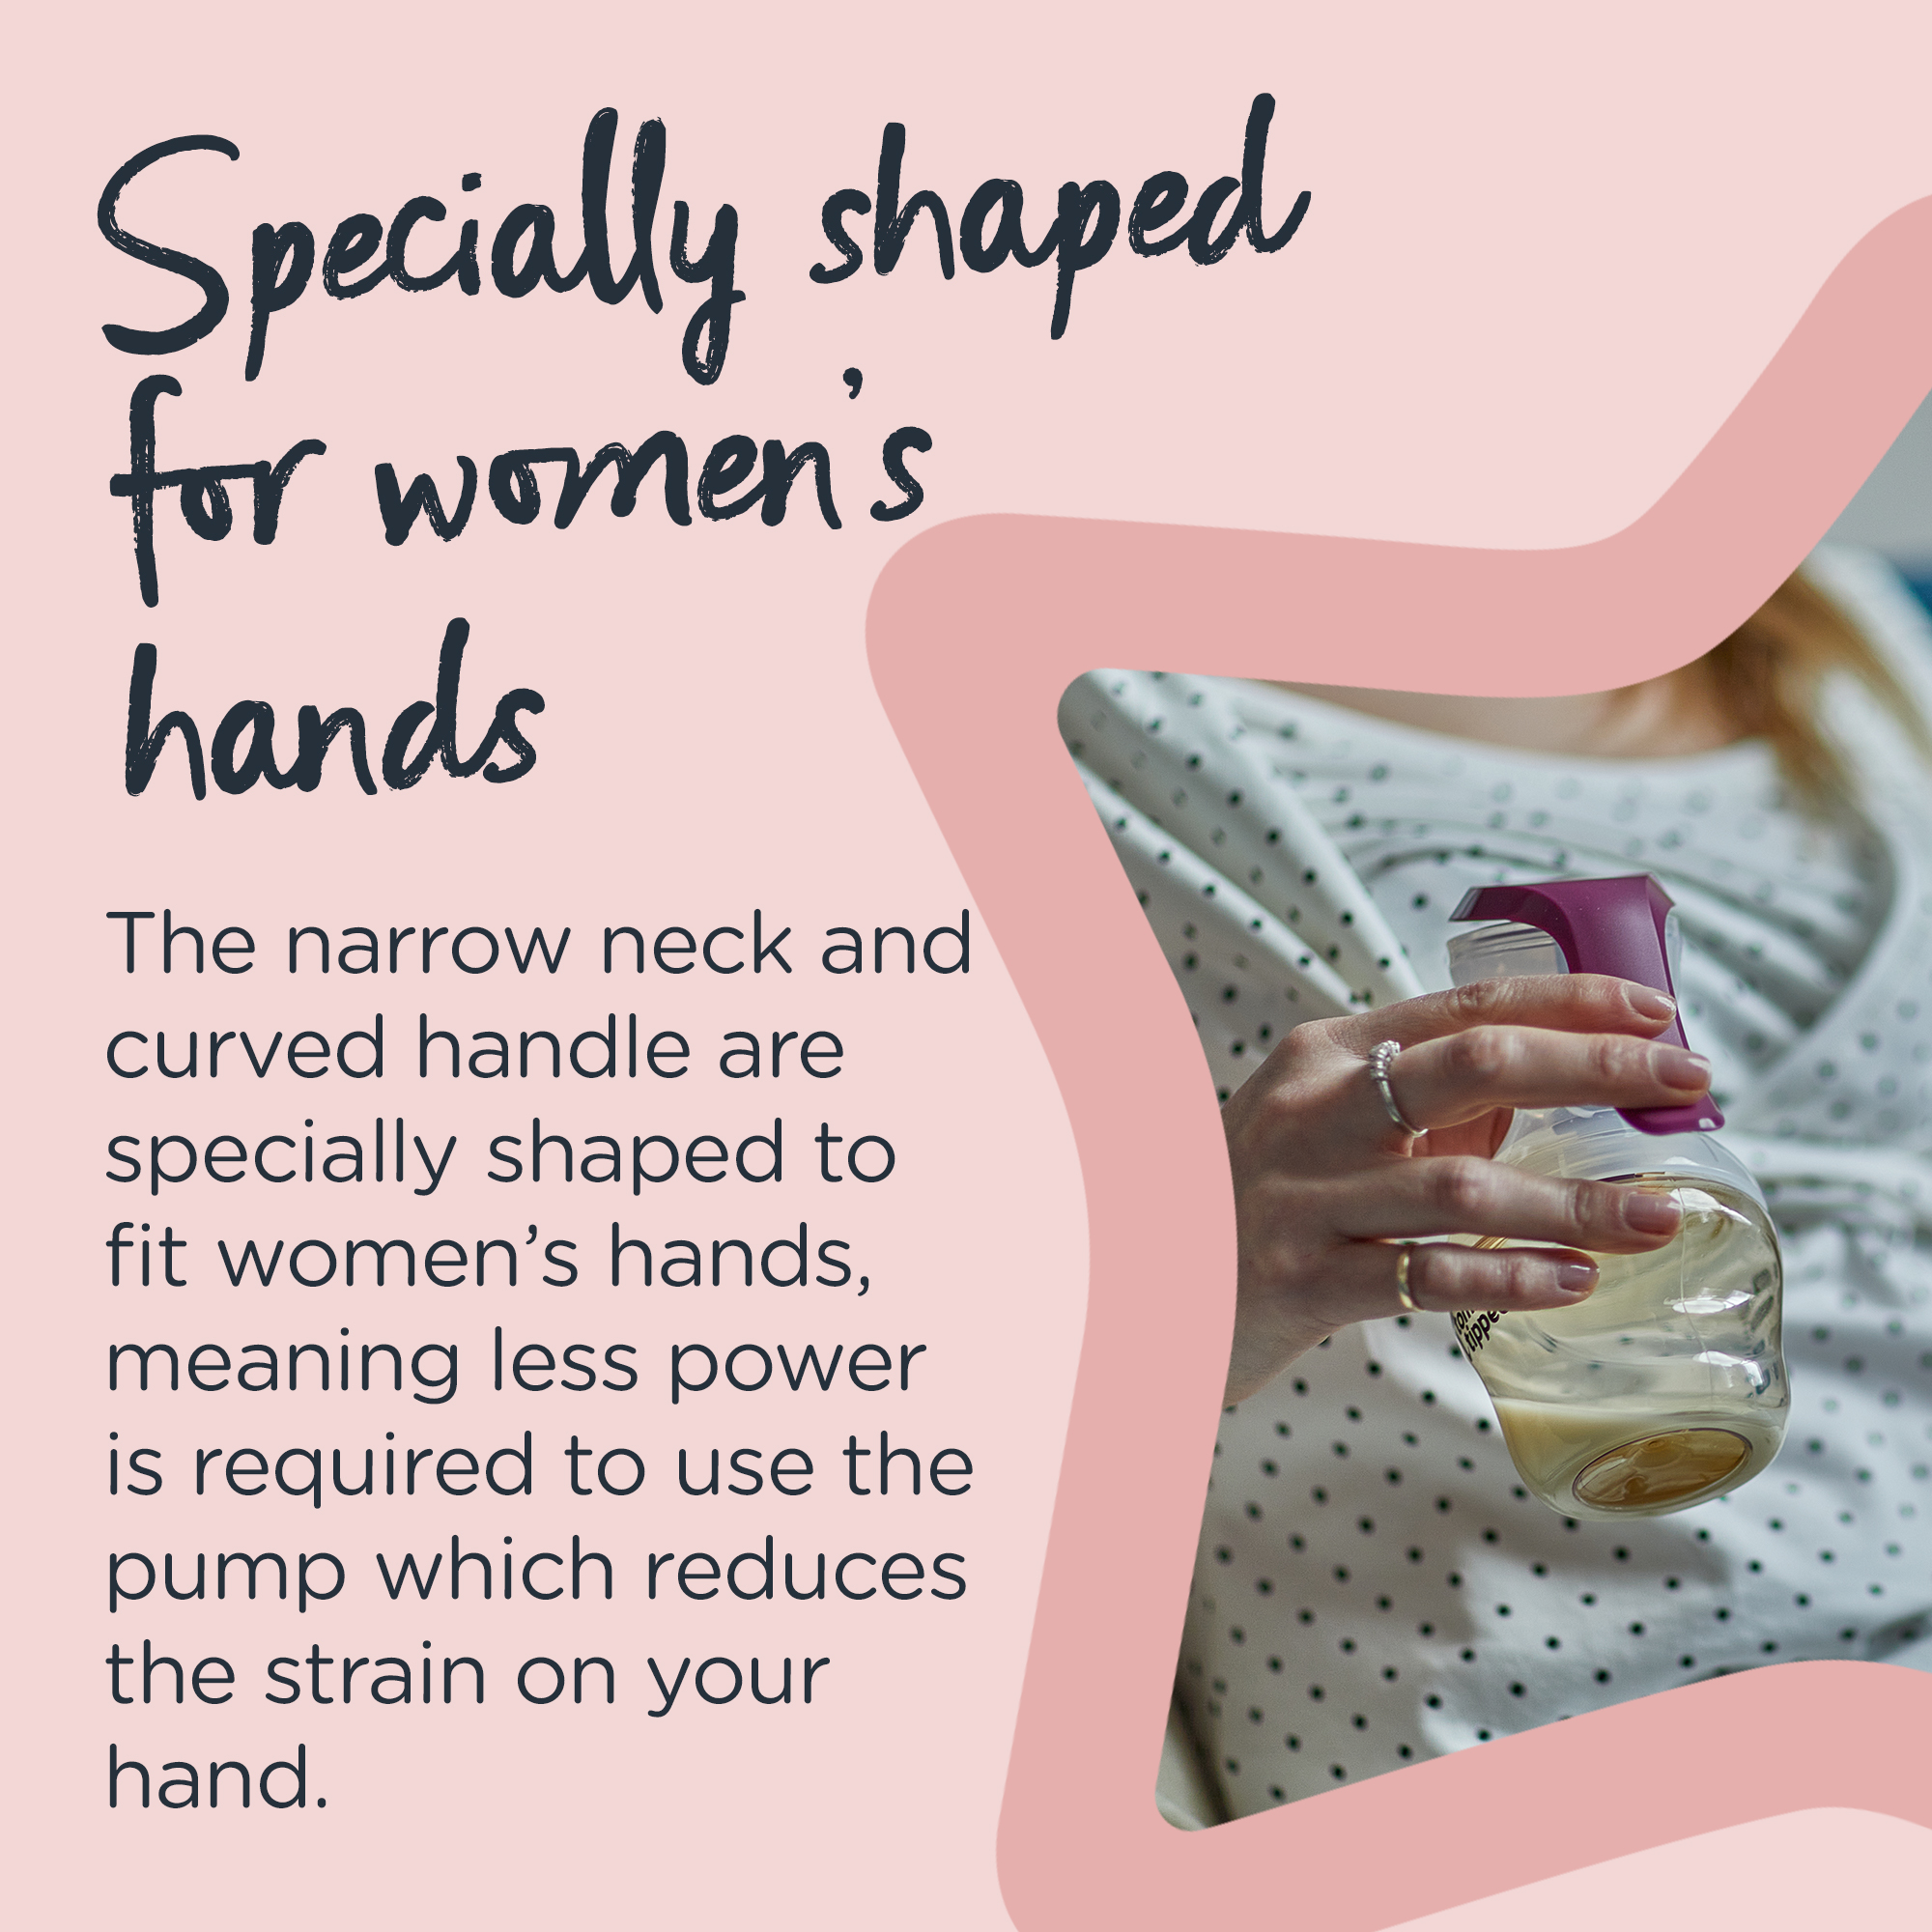 Tommee Tippee Made for Me Single Manual Breast Pump | Soft, Cushioned Silicone Cup | Reduced Hand Strain - image 3 of 8